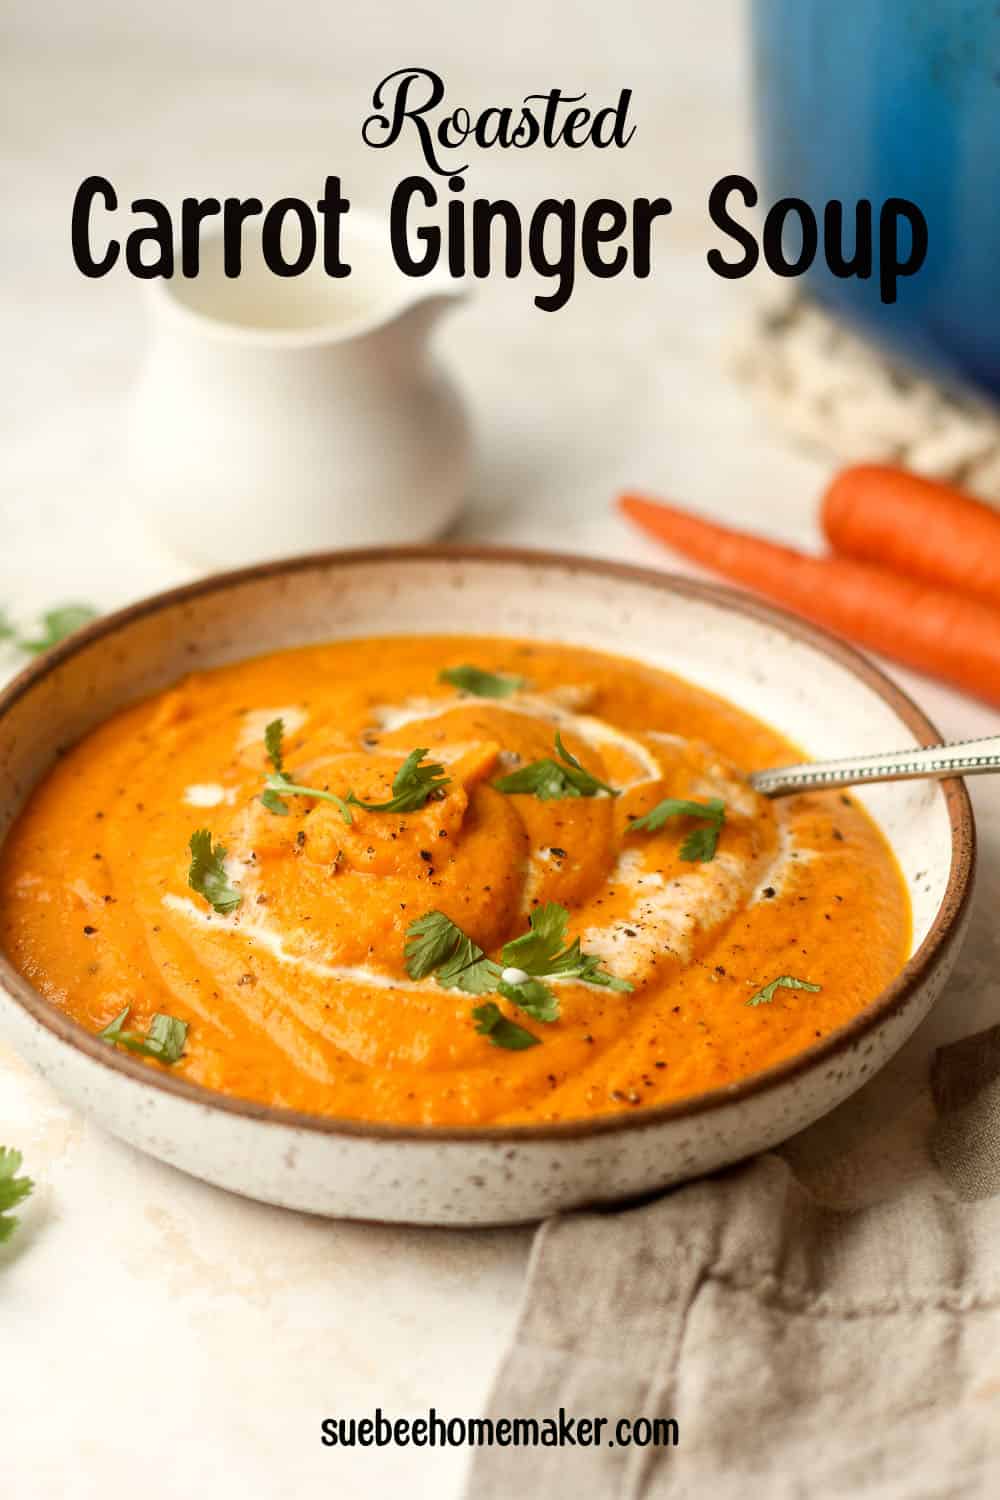 Side view of a bowl of roasted carrot ginger soup.